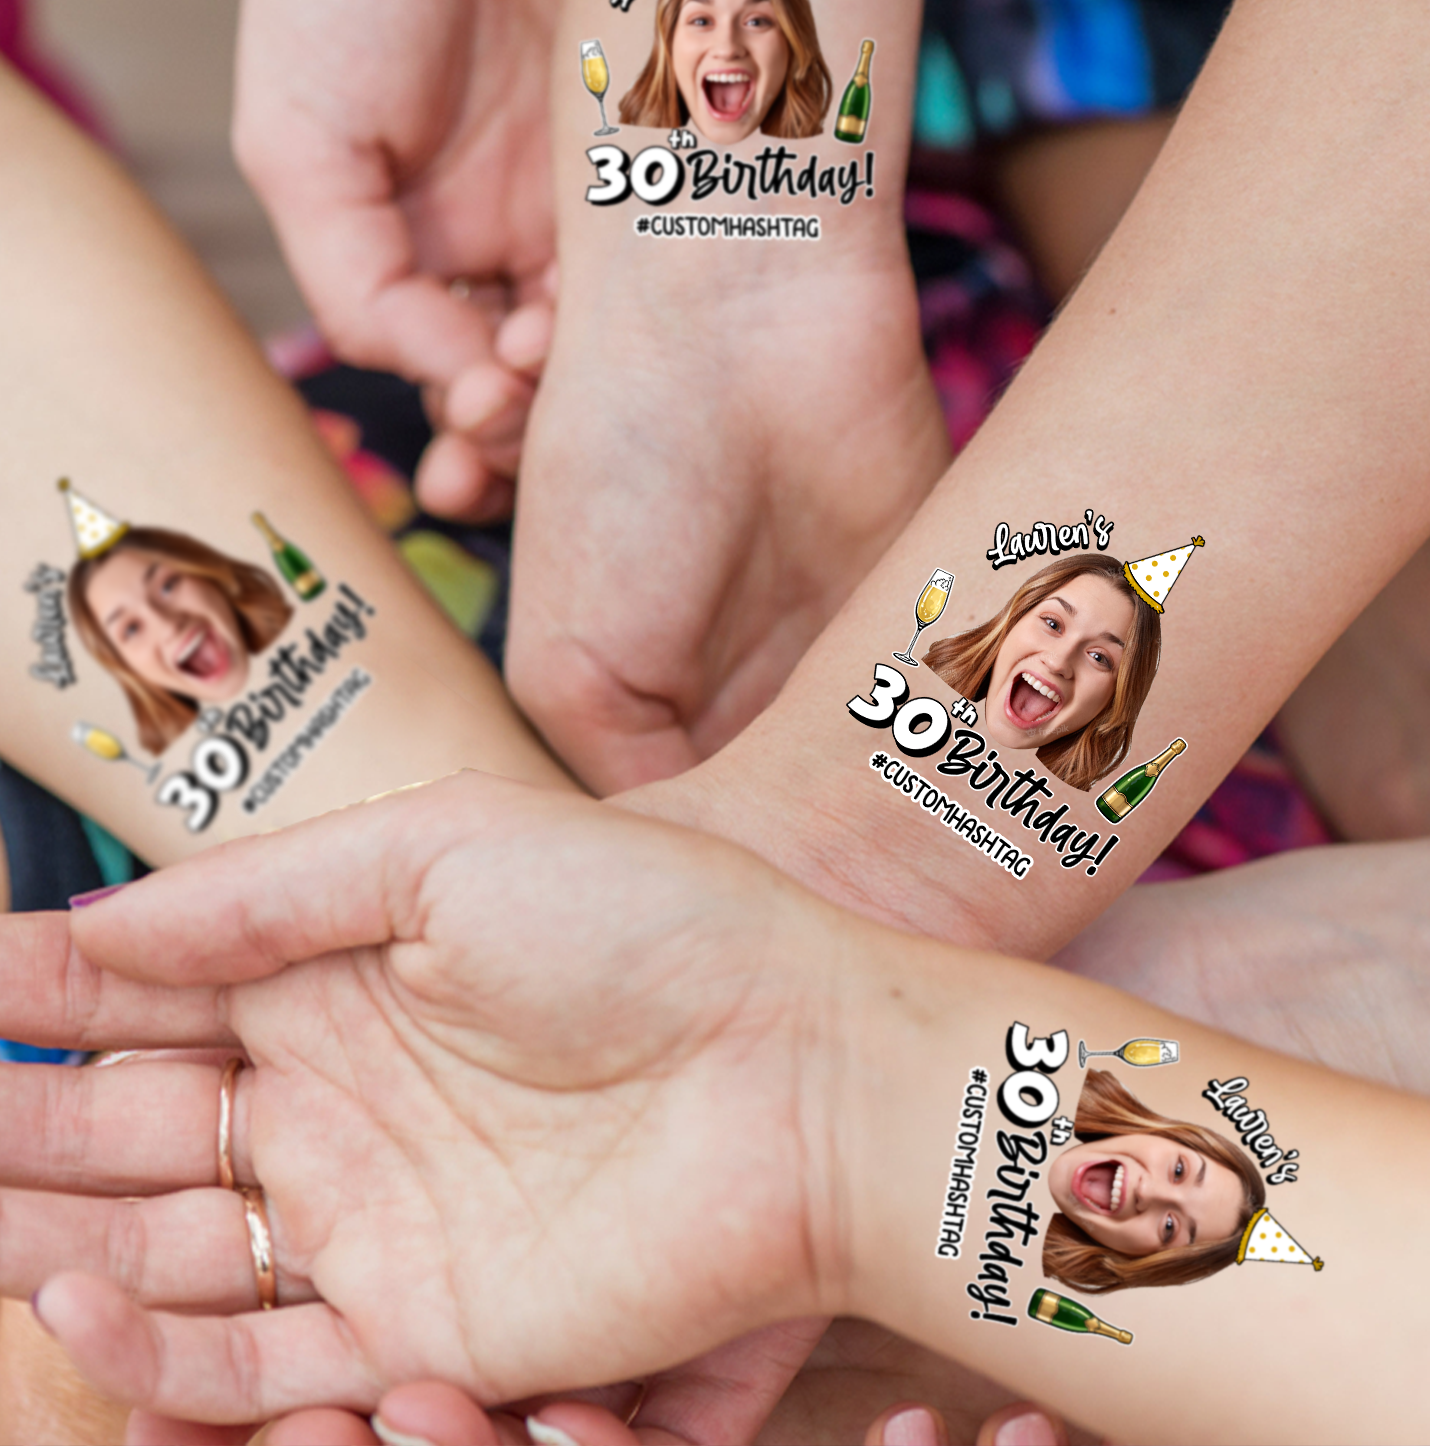 Birthday Party, Custom Temporary Tattoo With Personalized Photo And Texts, Fake Tattoo, Birthday Gift